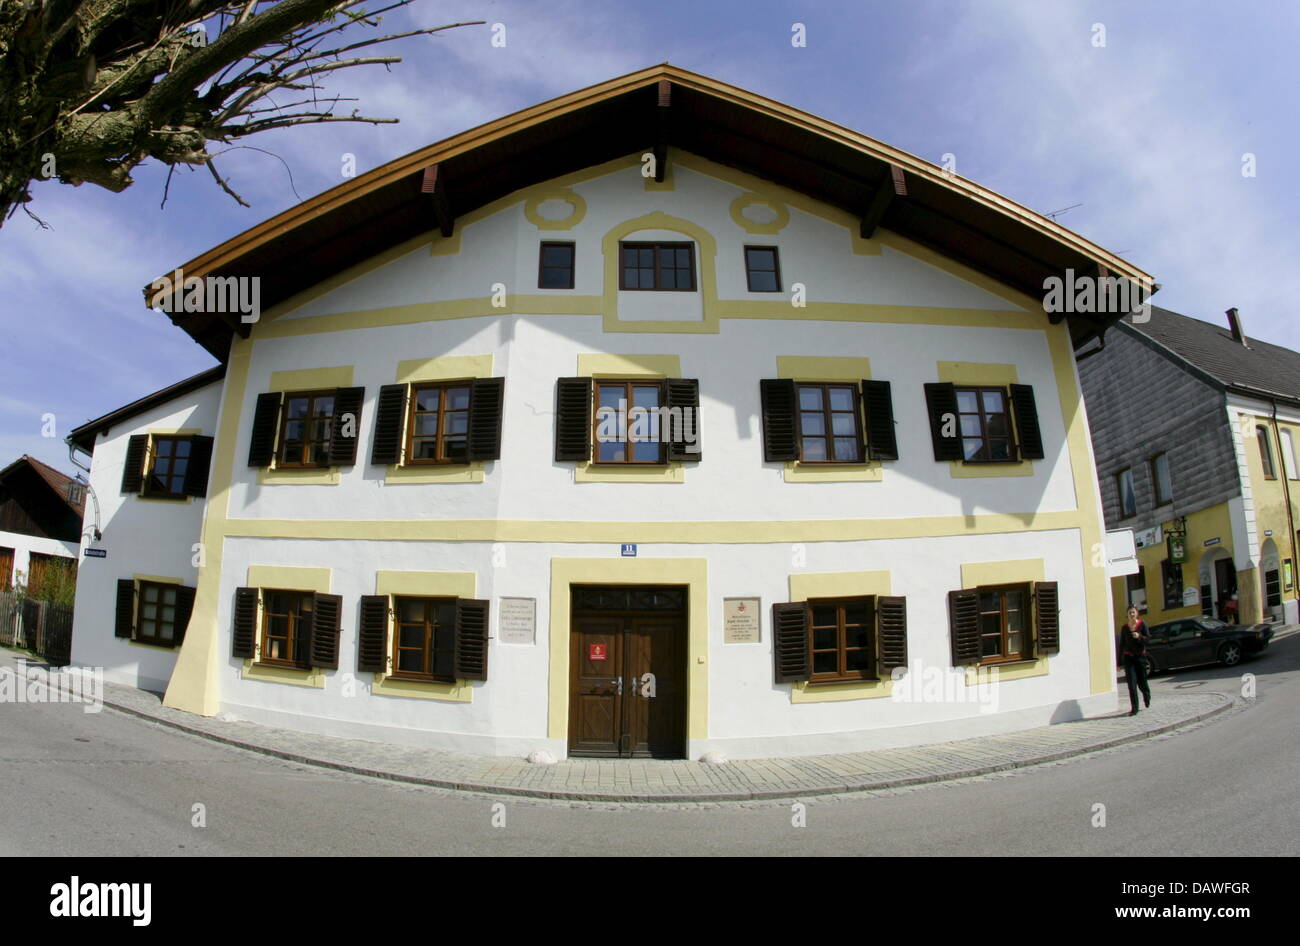 The picture shows the birthplace of Pope Benedict XVI in Marktl am Inn, Germany, Friday, 13 April 2007. Just in time with the Pope's 80th anniversary the 262-year-old building is open for visitors from Sunday, 15 April 2007. Photo: Matthias Schrader Stock Photo